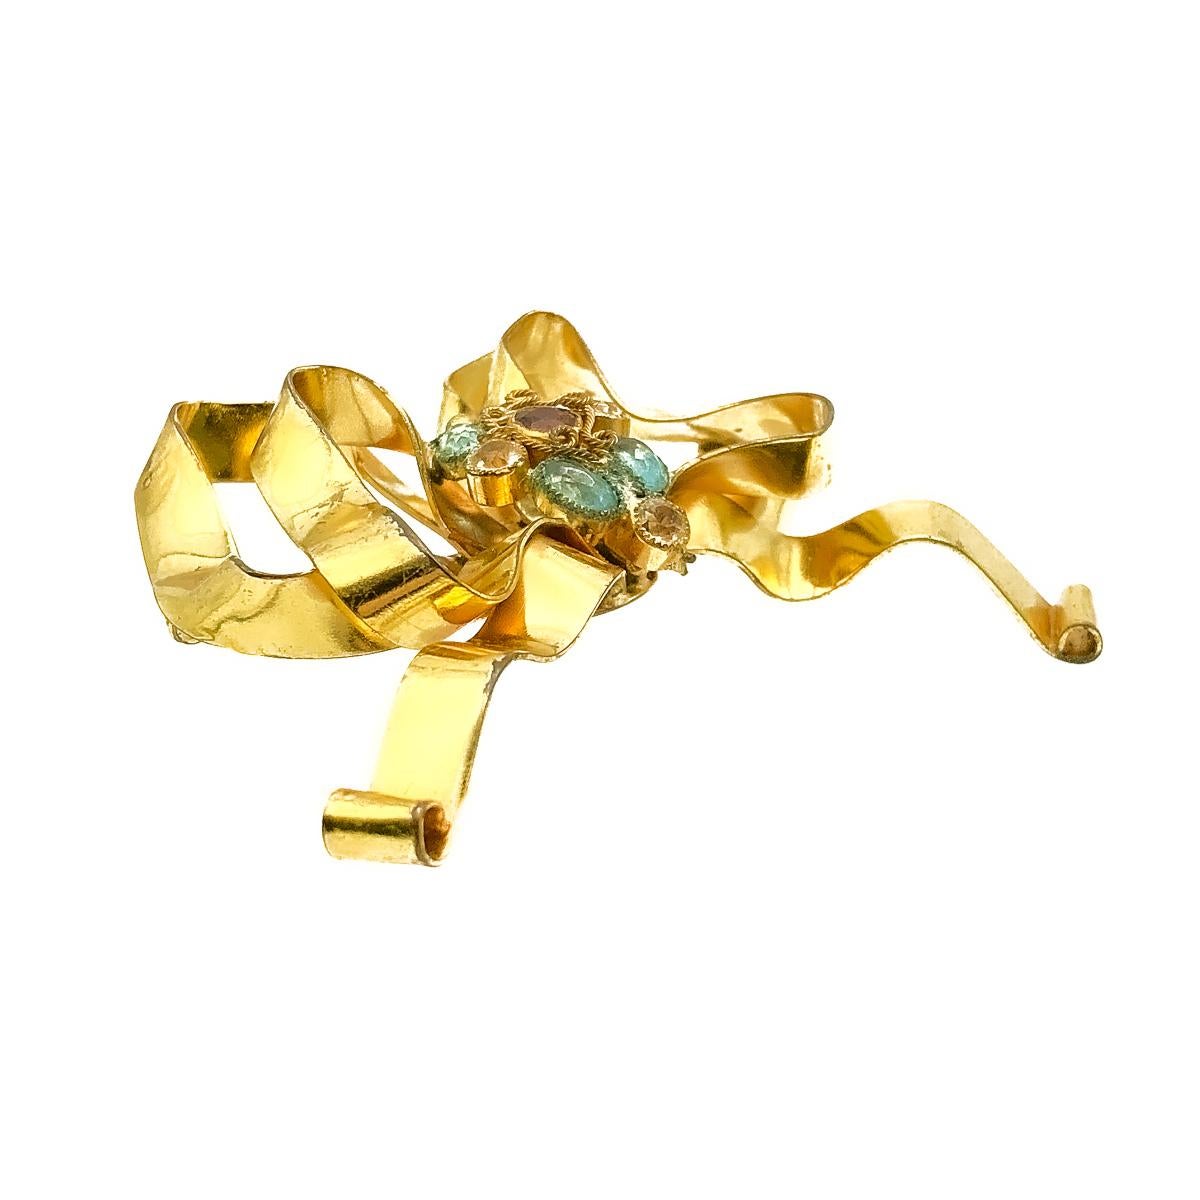 Vintage Sandor Bow Brooch. Crafted in gold plated metal with coloured glass paste stones. Featuring a large floppy bow design finished with a central display of aqua, garnet and white coloured stones. The metalwork around the stones inspired by